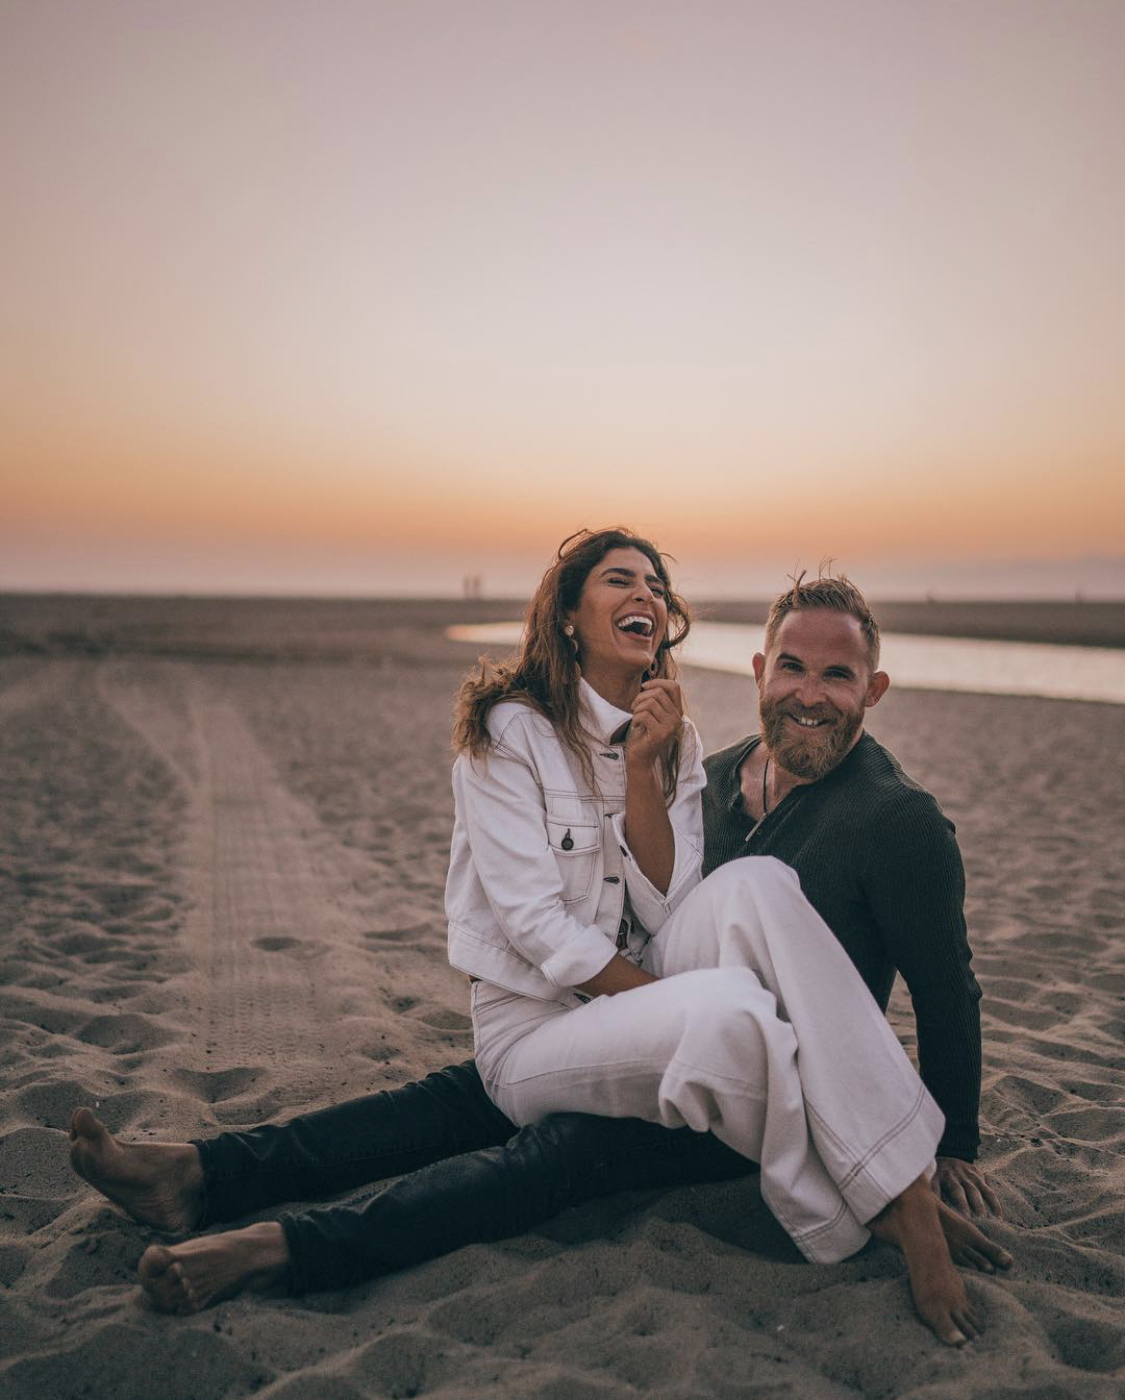 Couple laughing on the beach at sunset in Santa Monica California